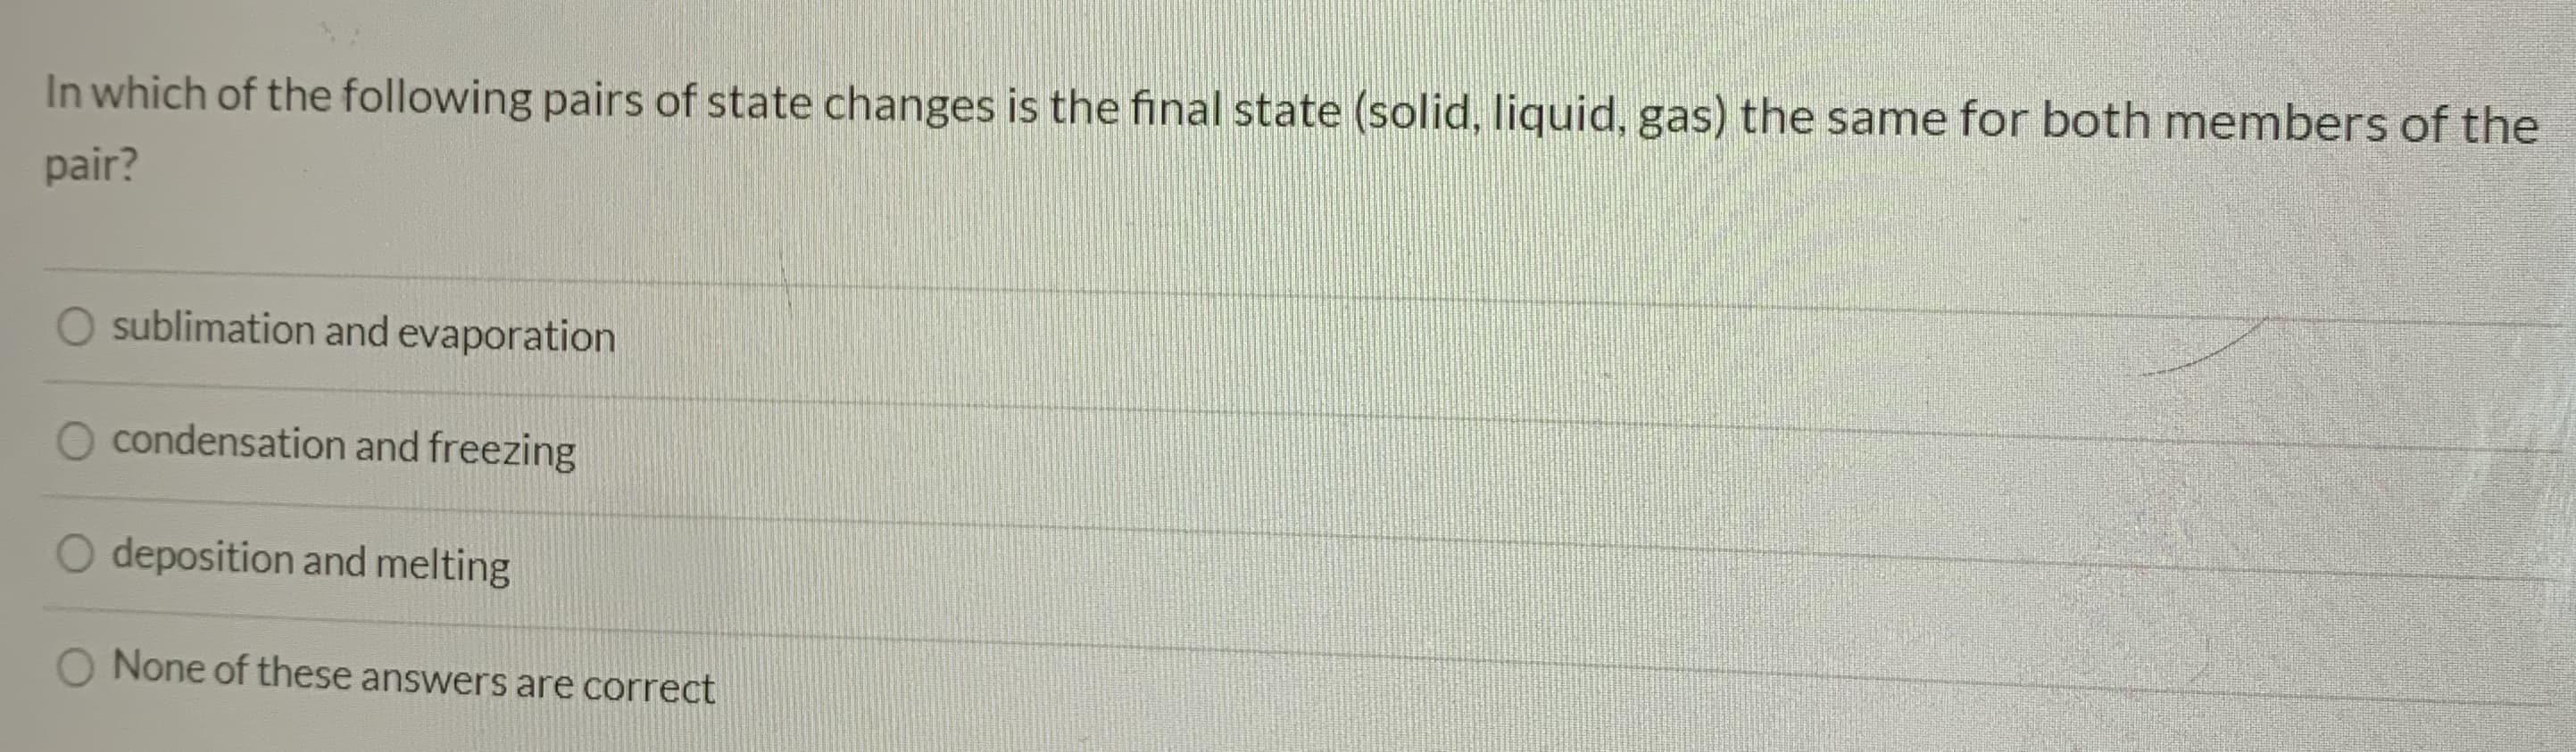 In which of the following pairs of state changes is the final state (solid, liquid, gas) the same for both members of the
pair?
sublimation and evaporation
condensation and freezing
O deposition and melting
None of these answers are correct
